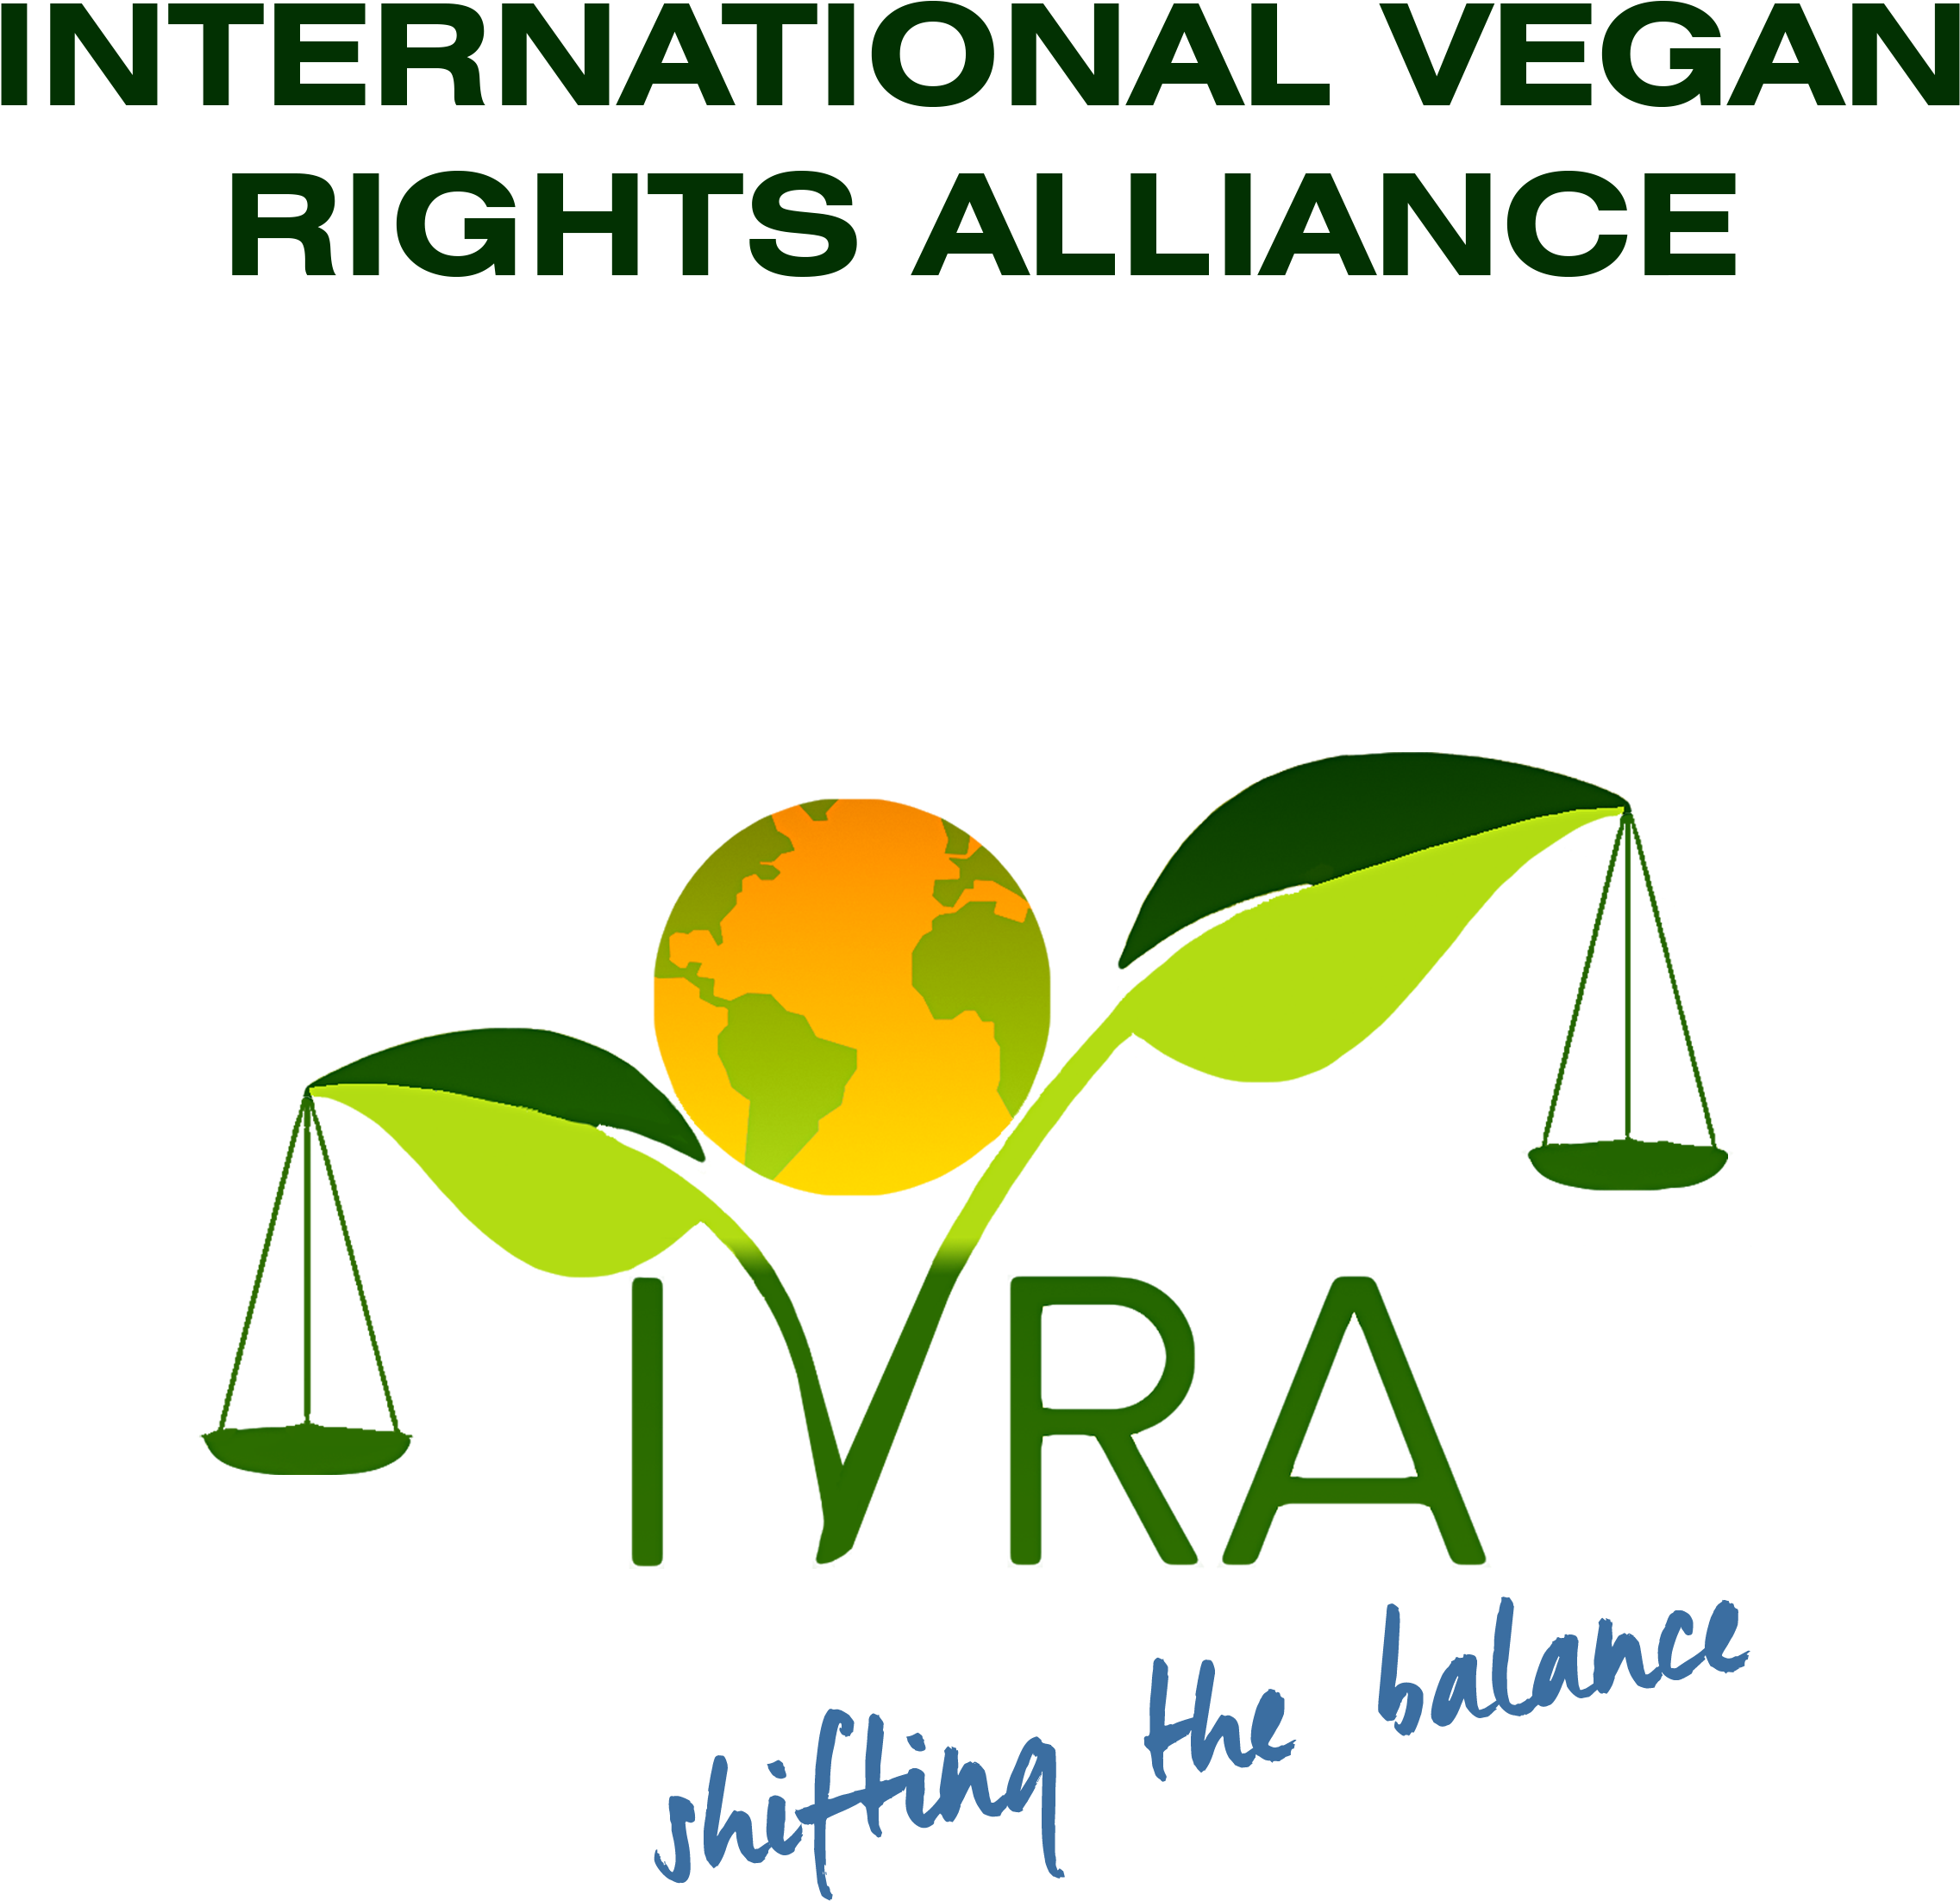 International Law, European Law And Court Cases - Vegan Rights (2500x2650)